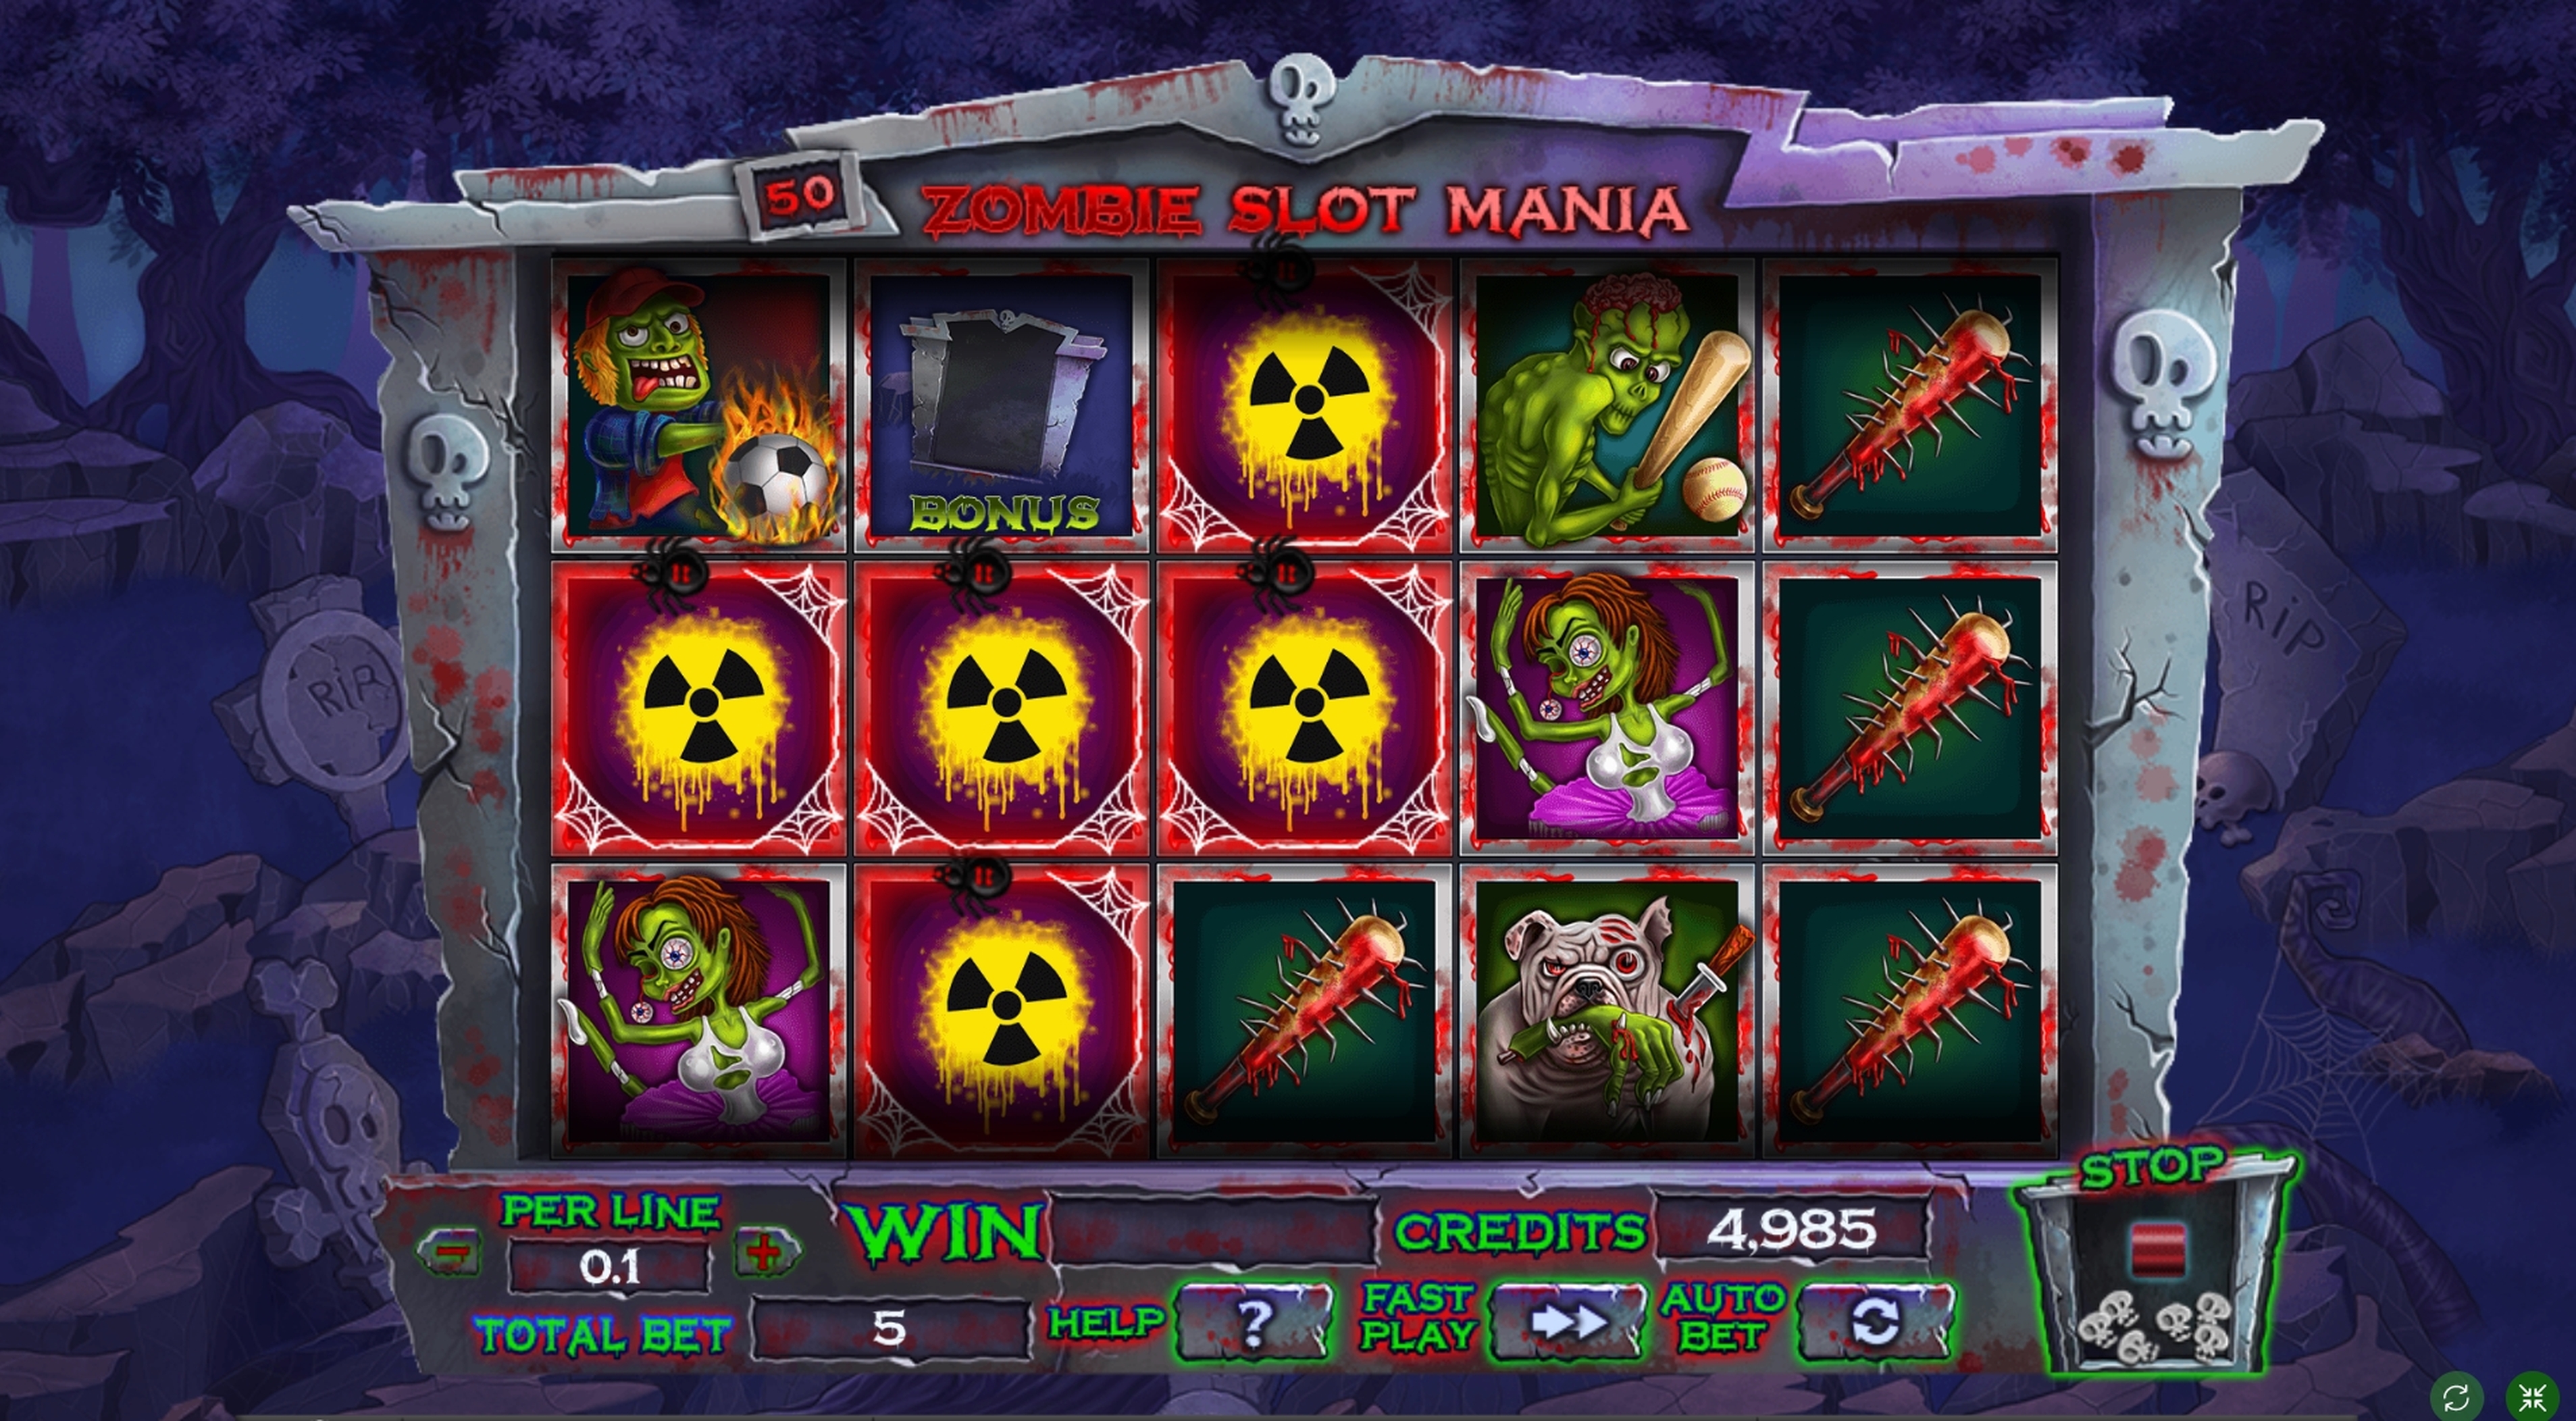 Win Money in Zombie slot mania Free Slot Game by Spinomenal